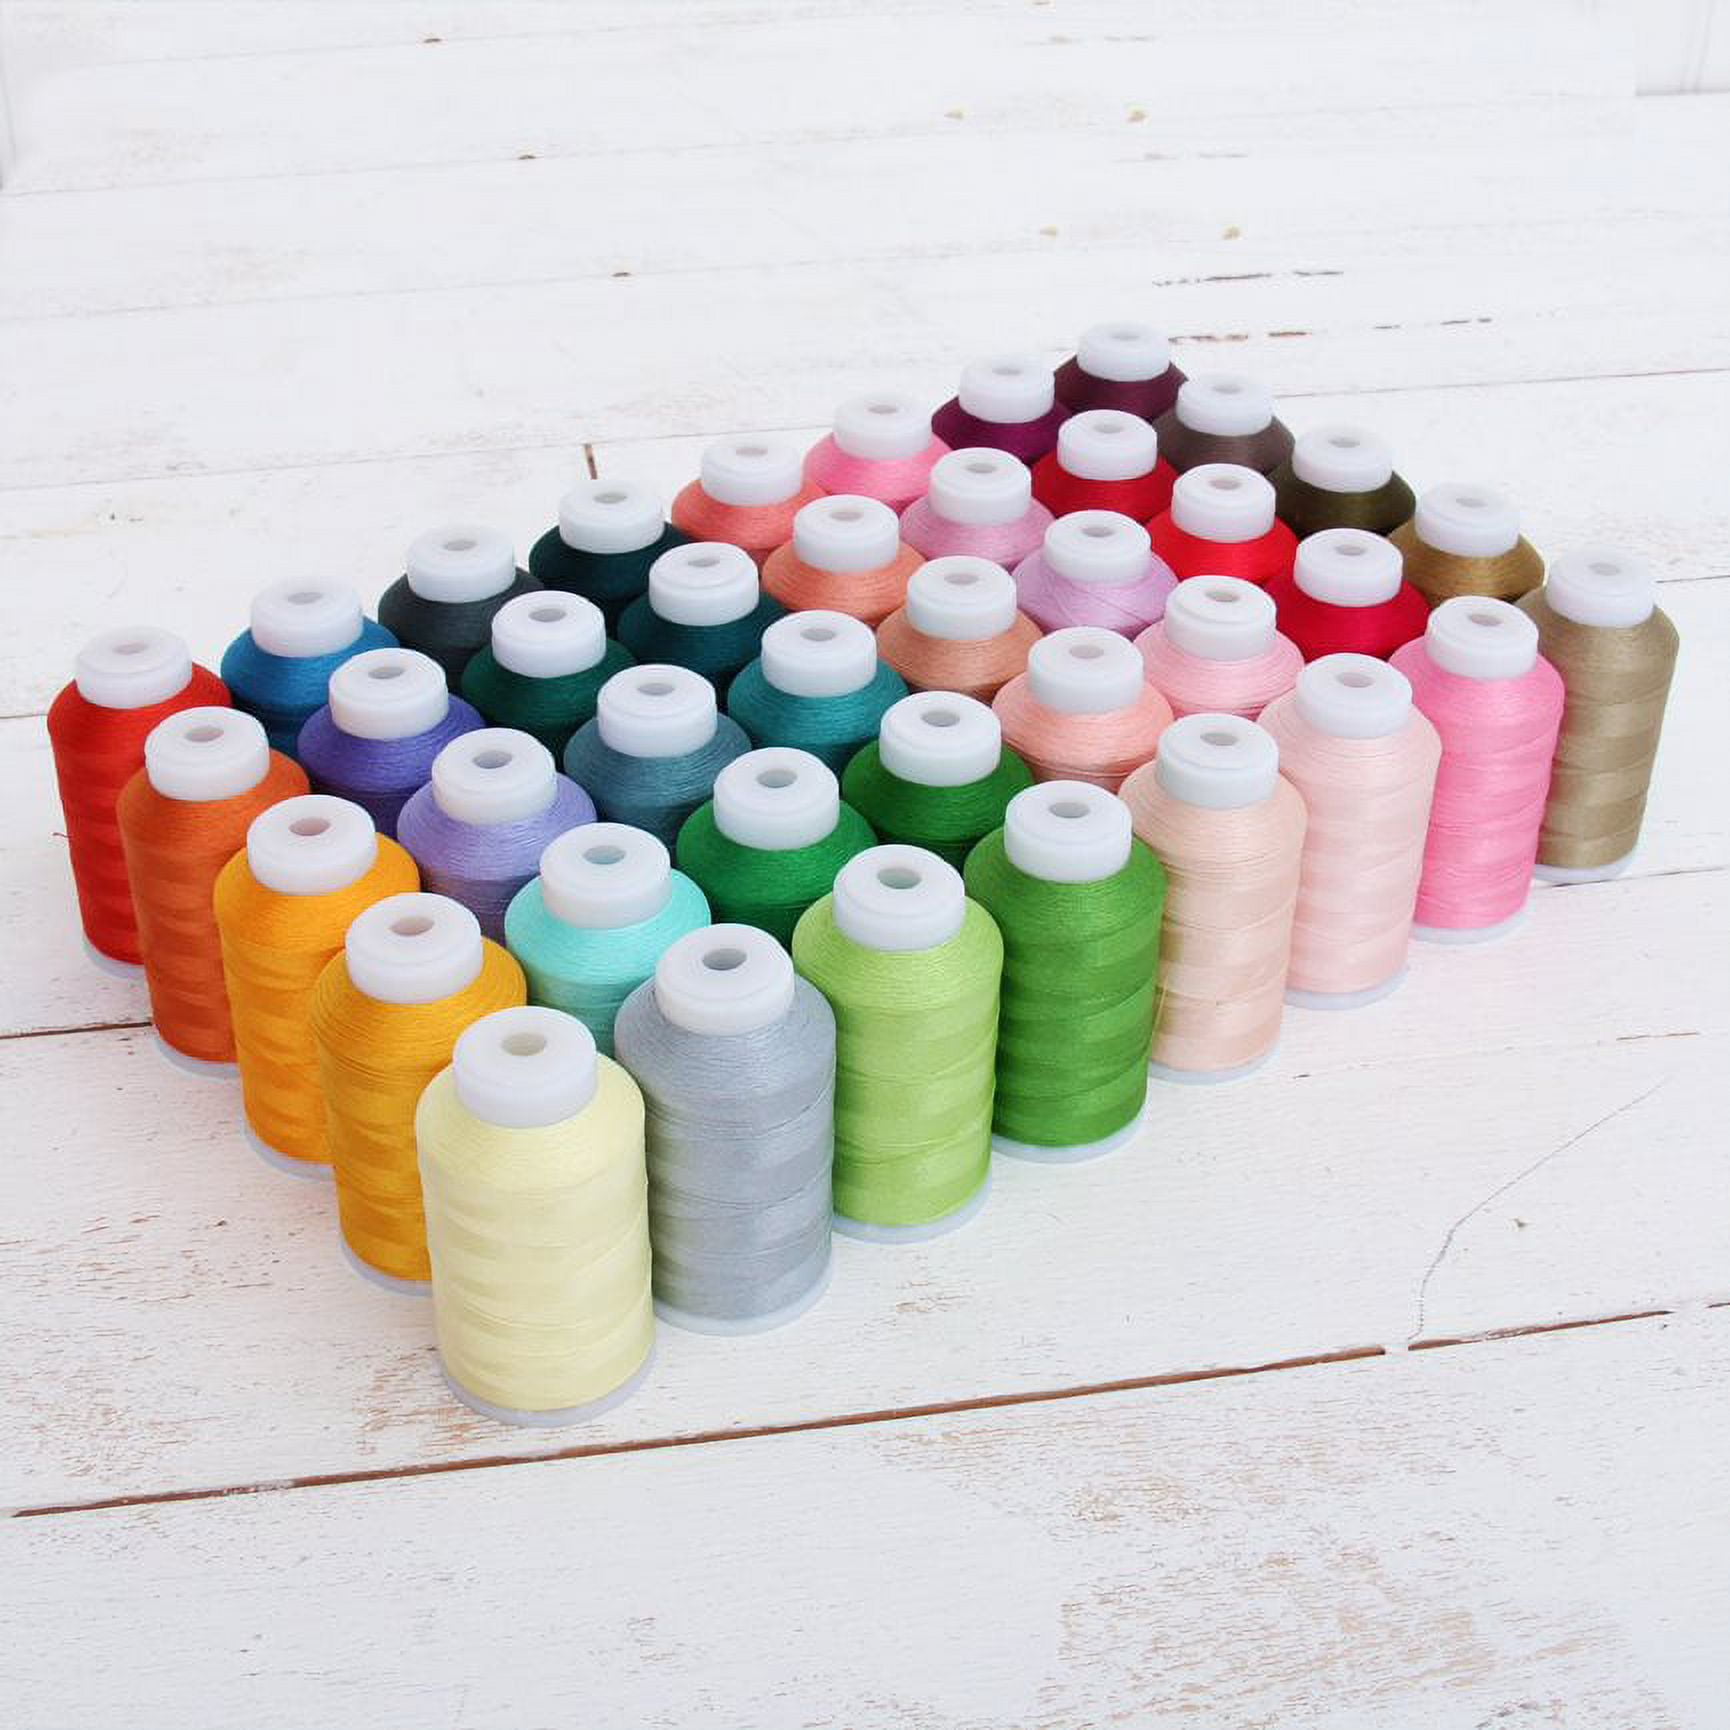 Machine Embroidery Thread Set - 40 Colors - Kit Brother —